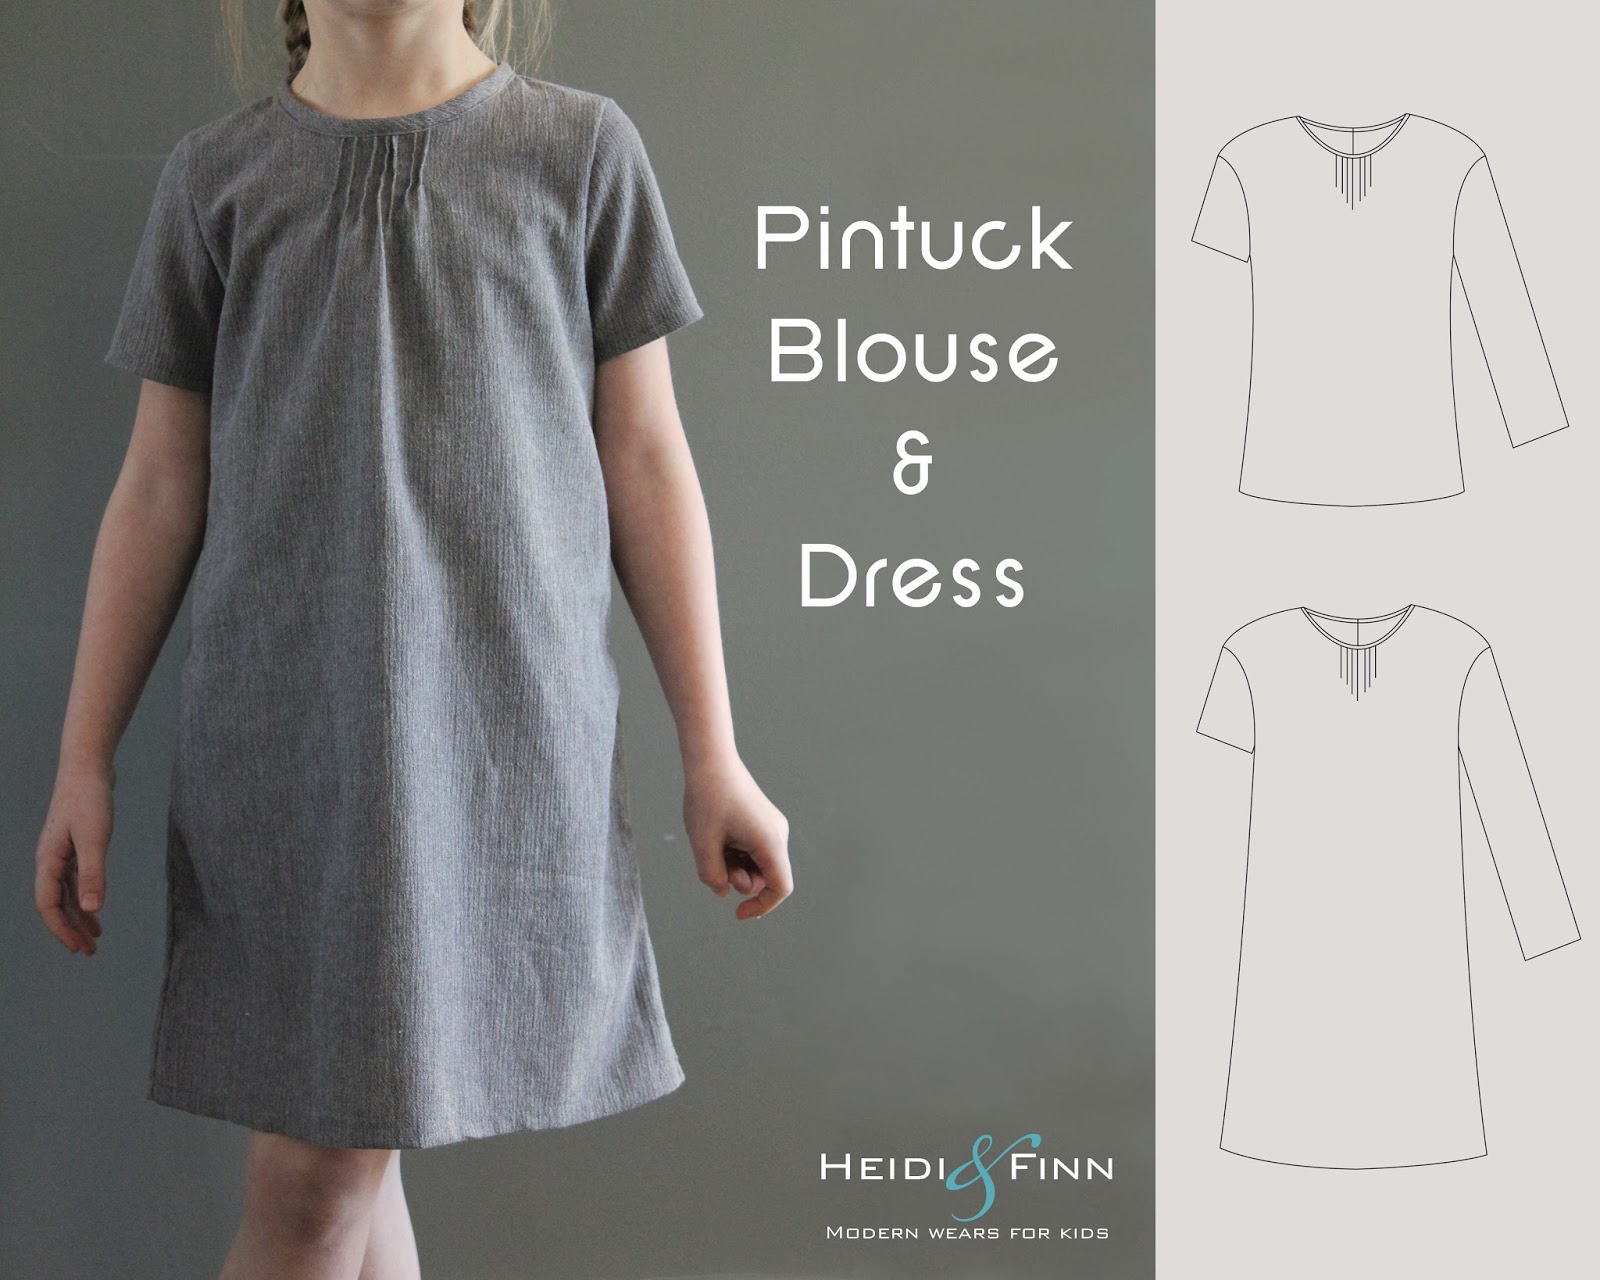 https://www.etsy.com/listing/181306848/pintuck-blouse-and-dress-pdf-pattern-and?